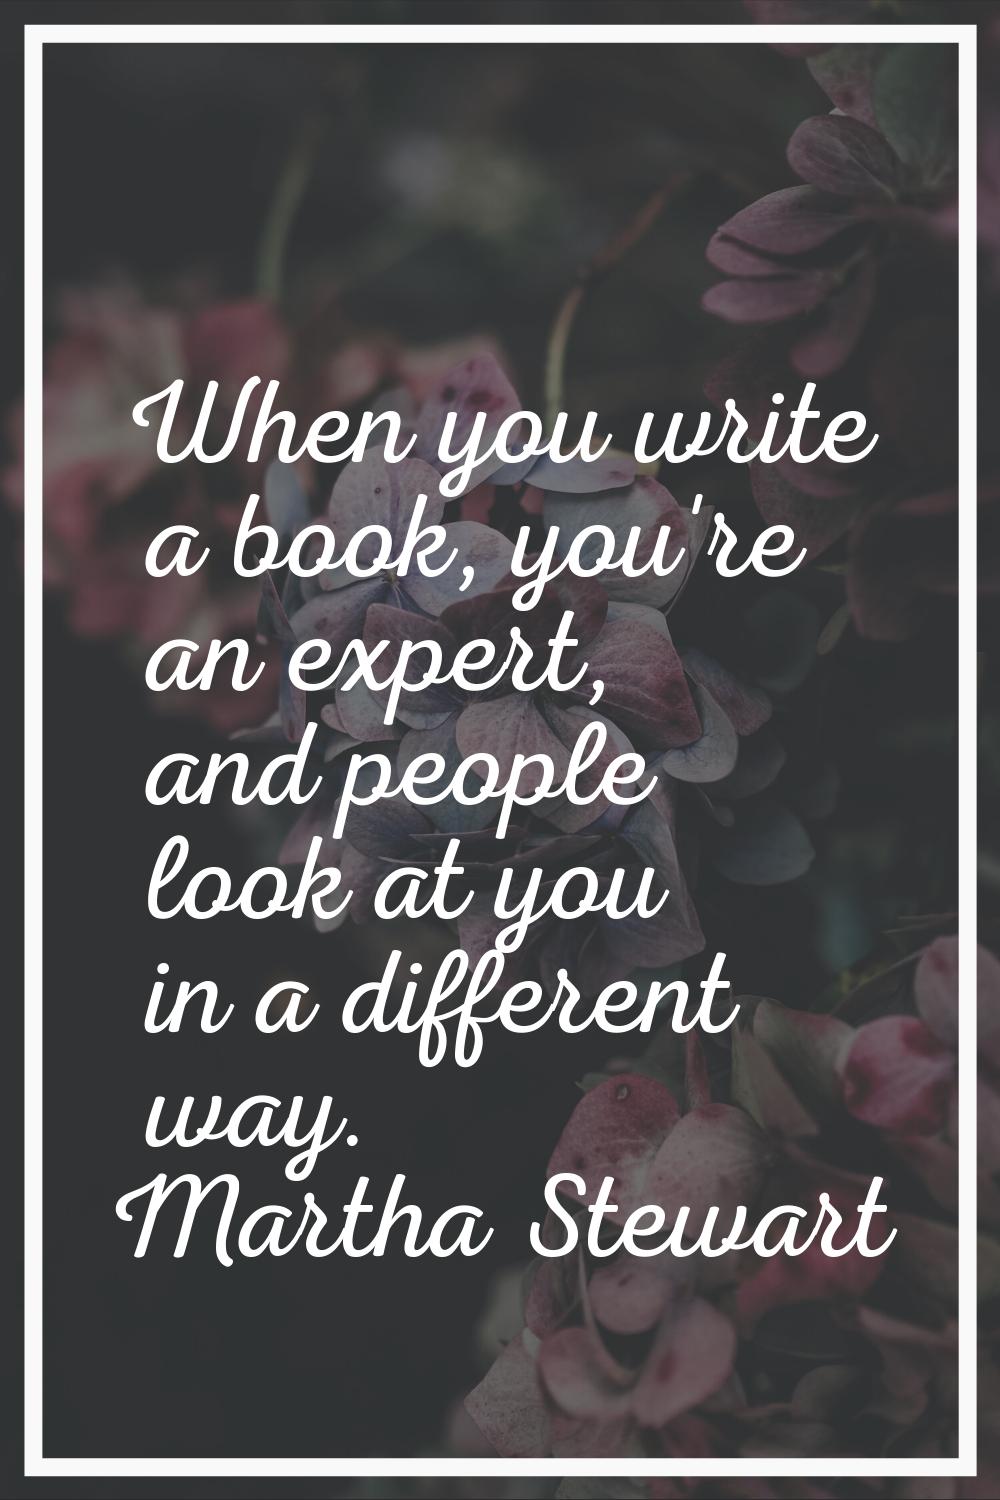 When you write a book, you're an expert, and people look at you in a different way.